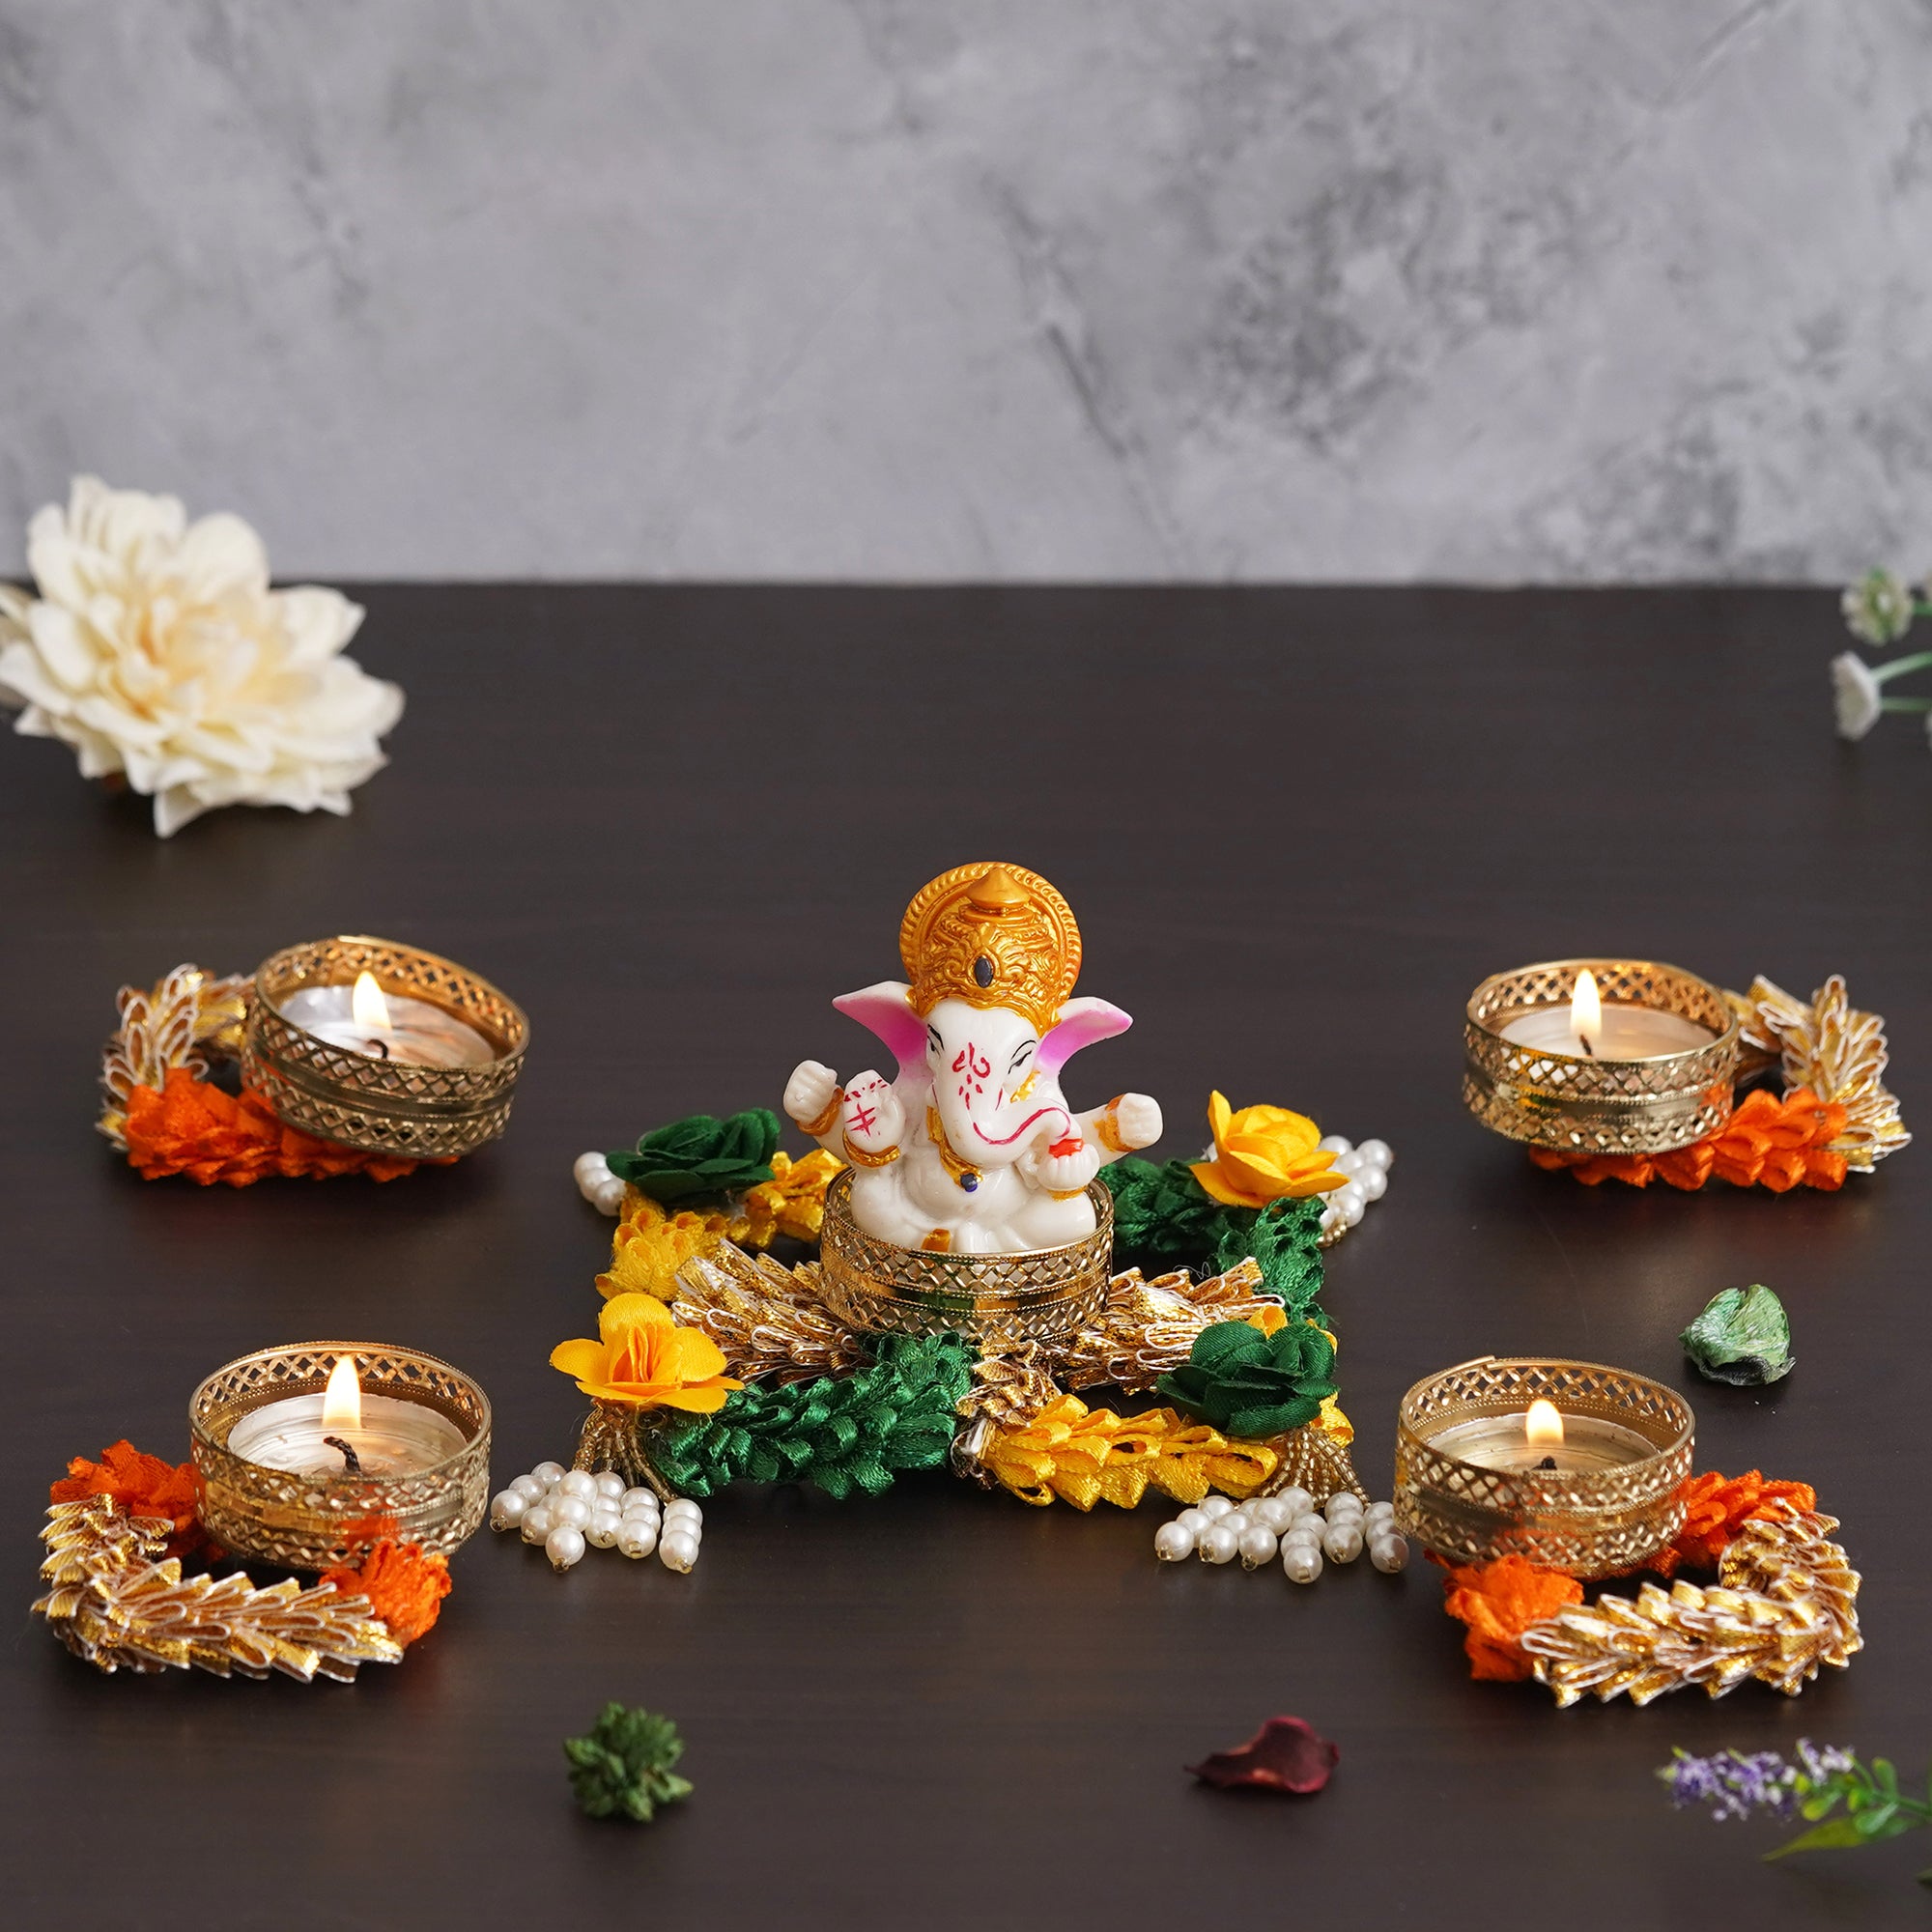 eCraftIndia Lord Ganesha Idol on Floral and Beads Embellished Handcrafted Plate with 4 Decorative Tea Light Candle Holders